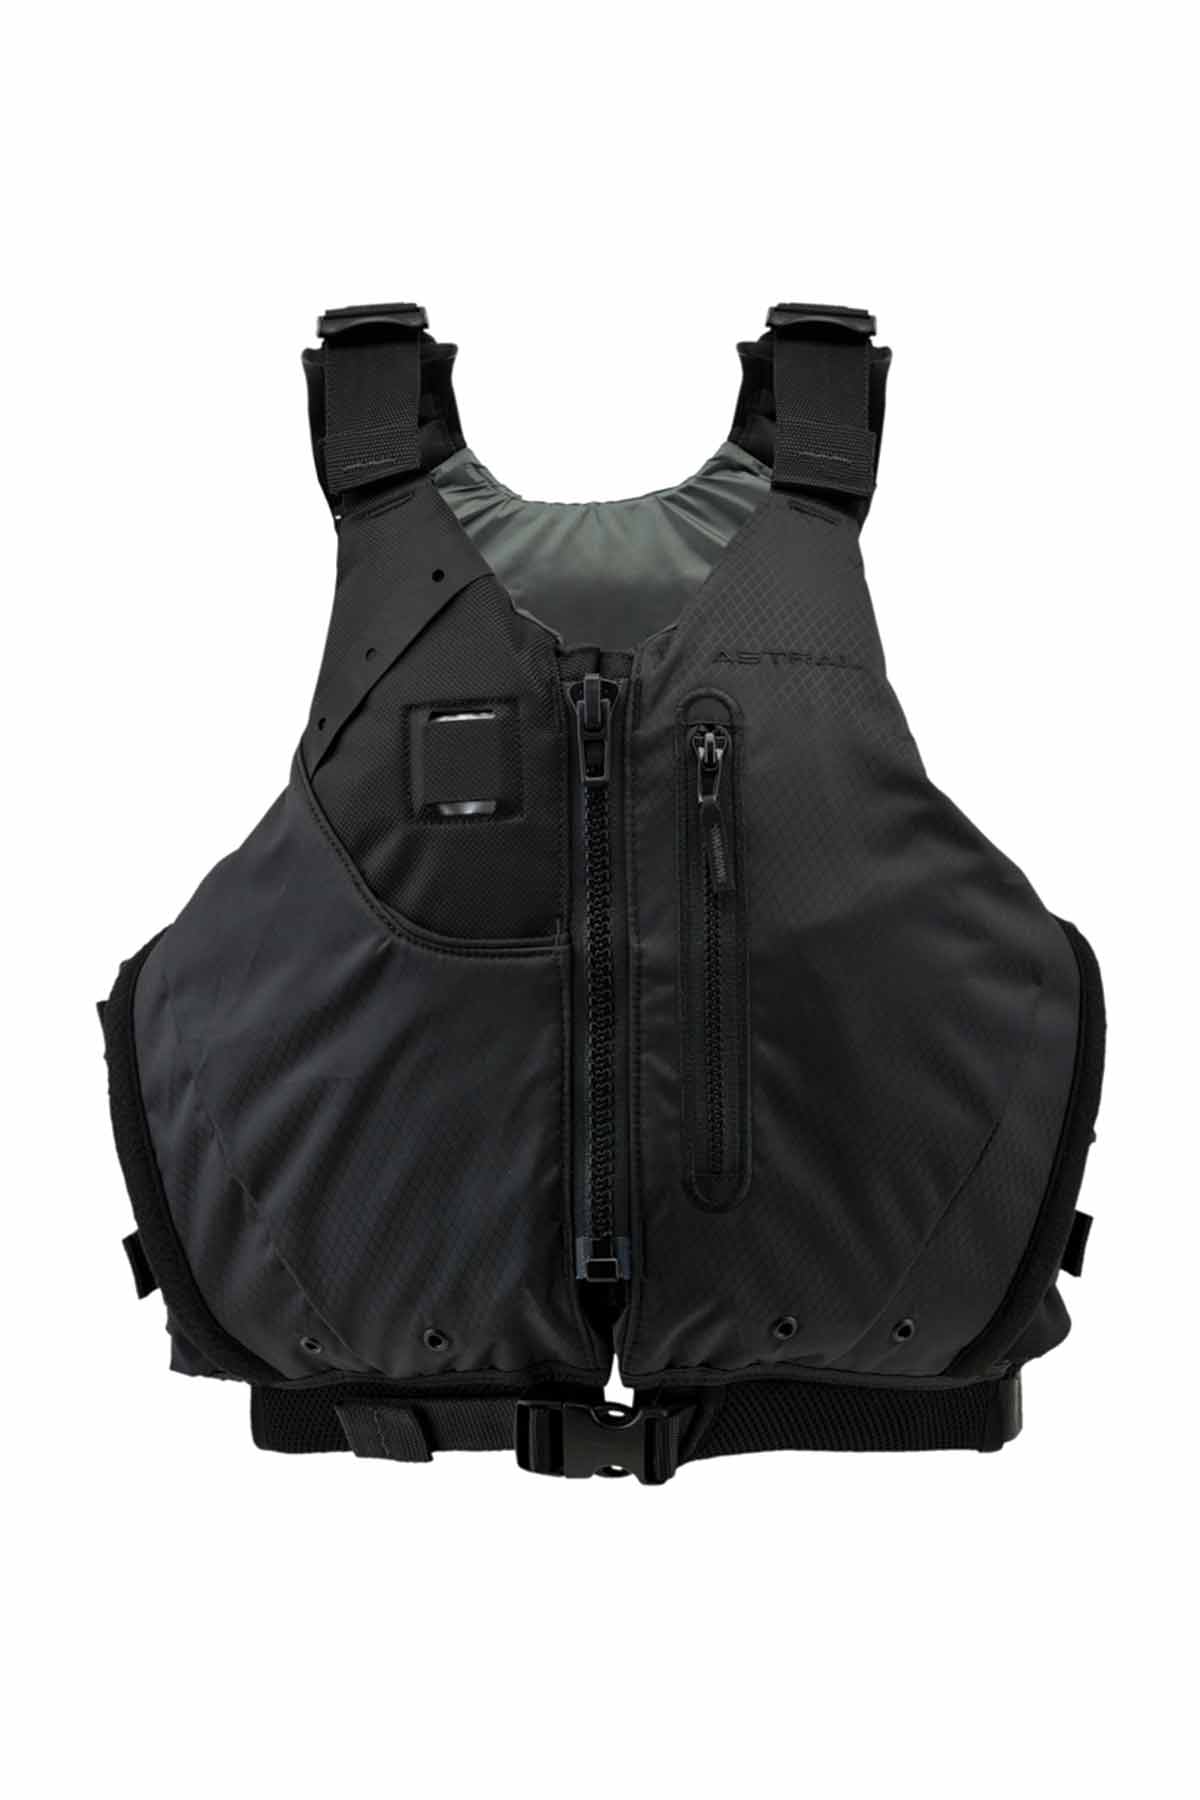 Astral Ceiba PFD Space Black Front View